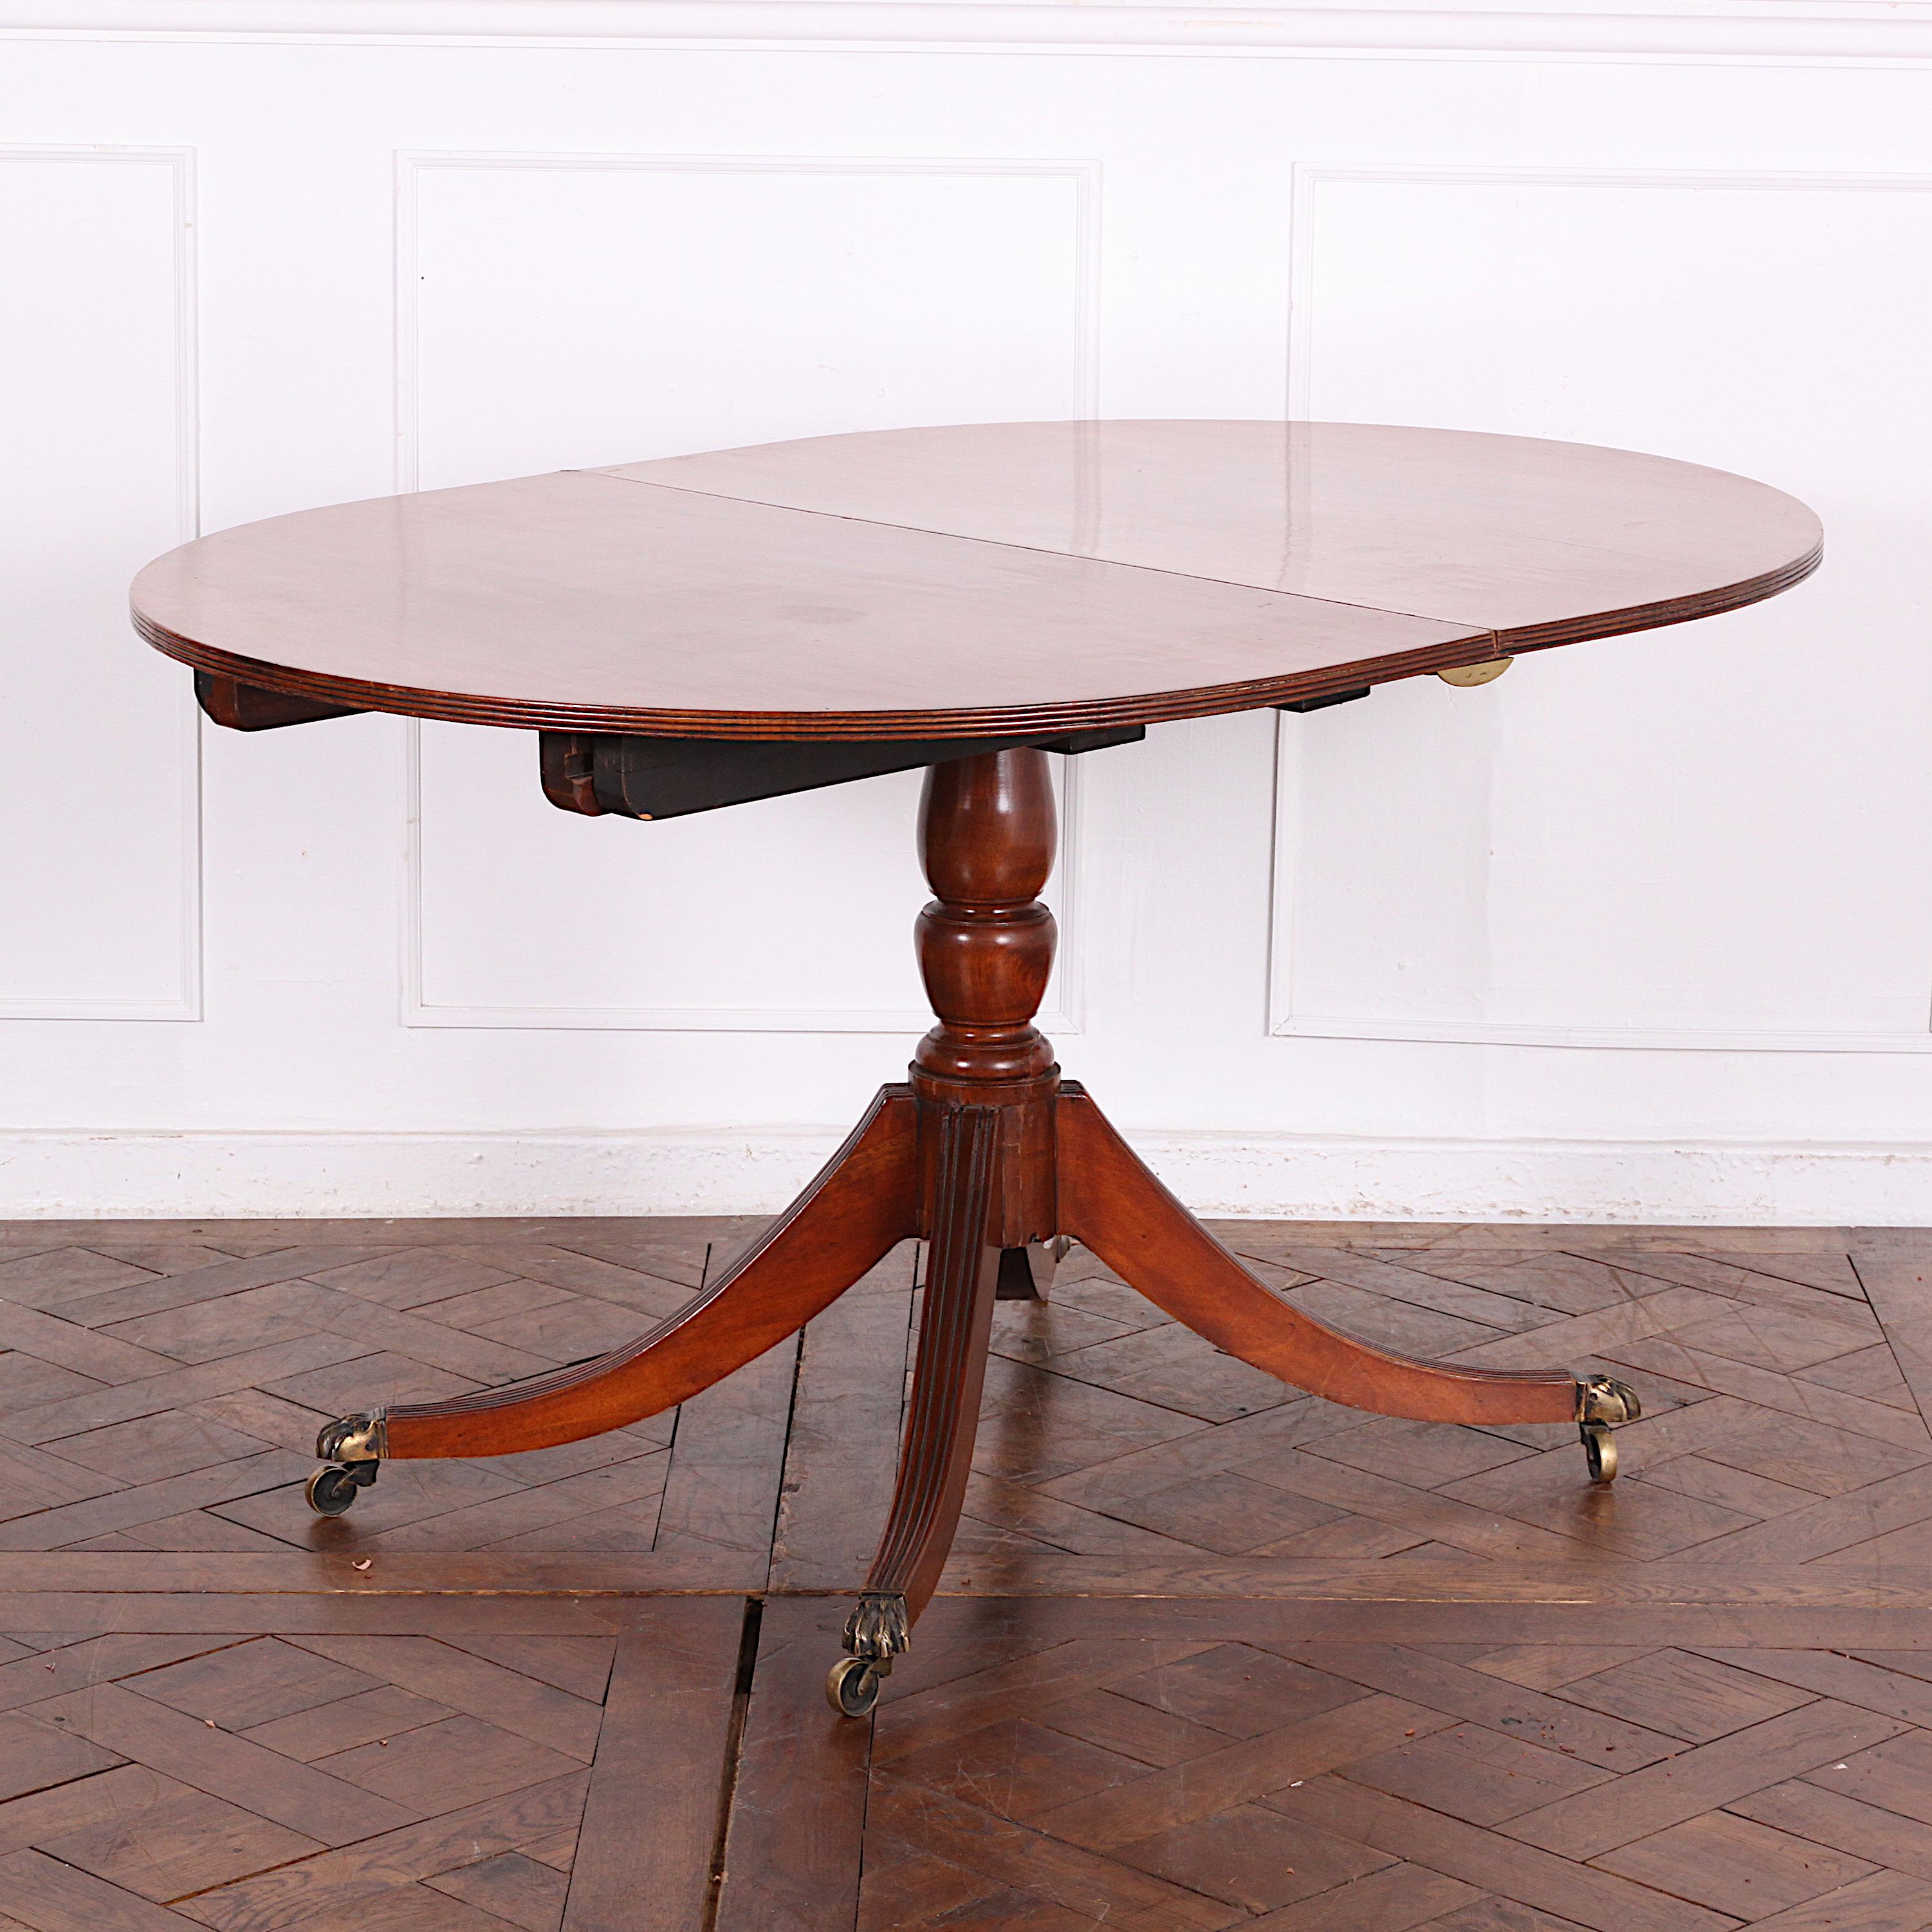 An English Georgian-revival single pedestal mahogany dining table with one leaf. The top and leaf of solid mahogany planks, the base with turned column and four out-swept sabre legs with their original brass castors. C. 1920


  